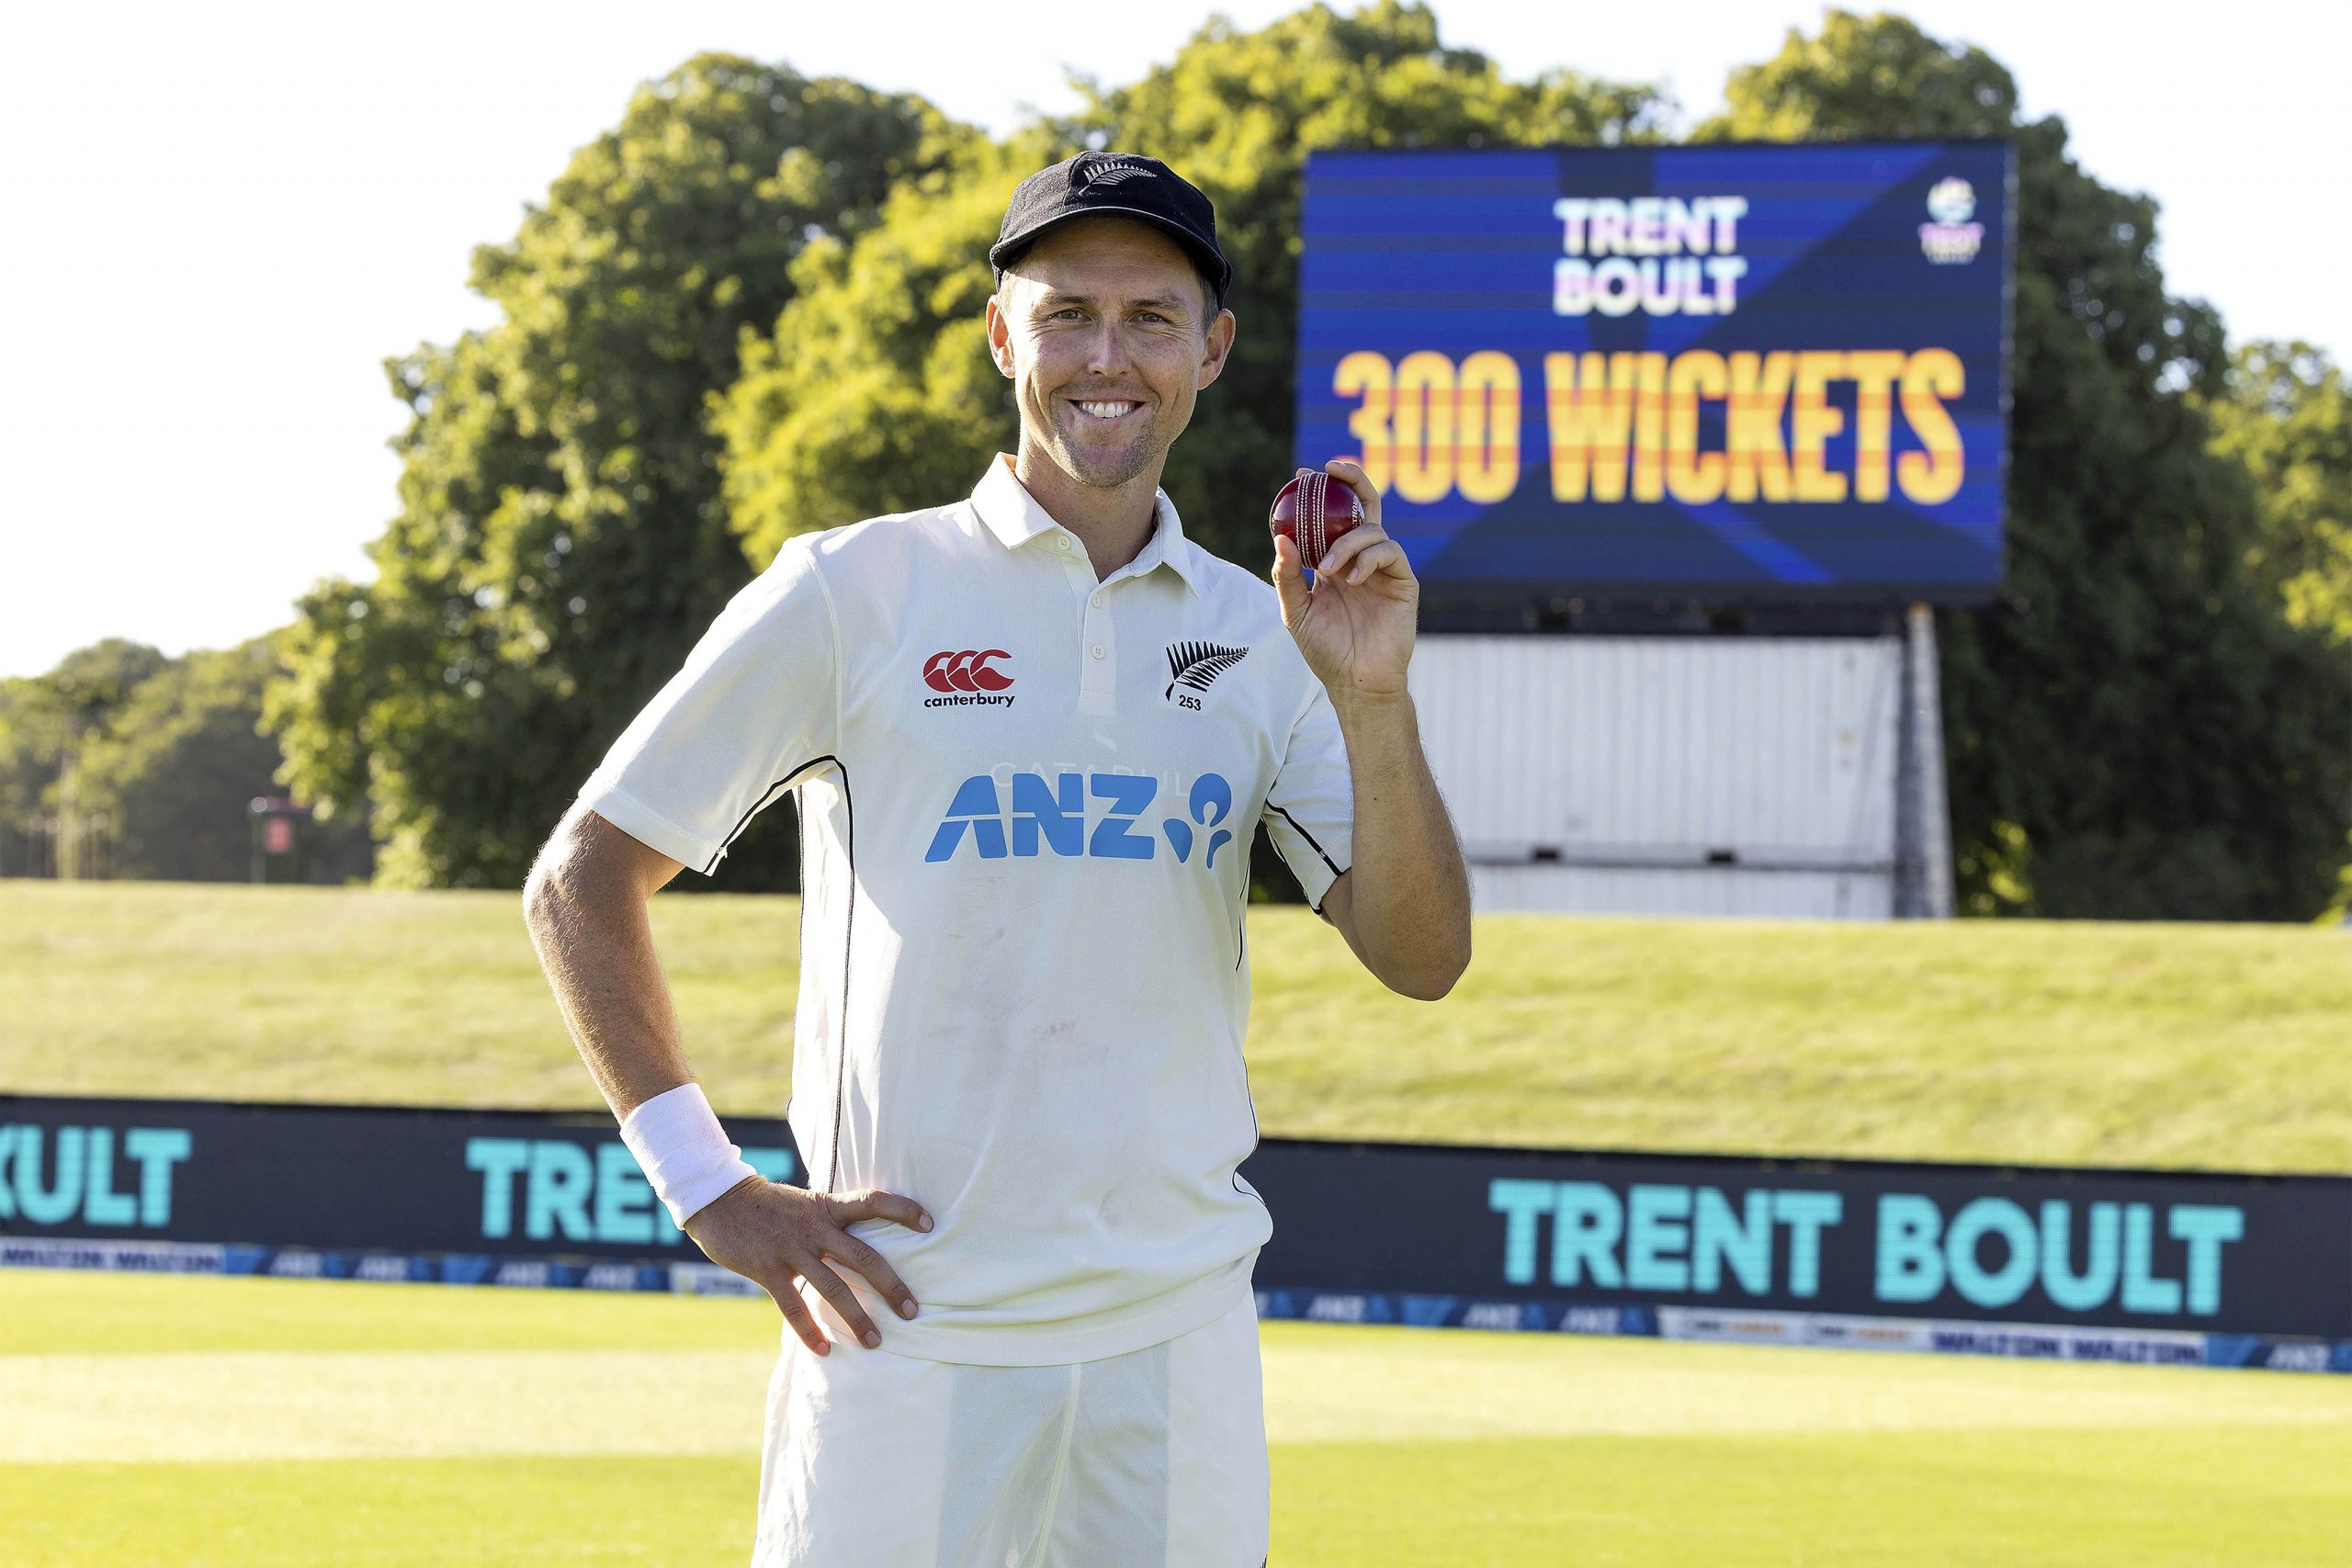 Who is Trent Boult?